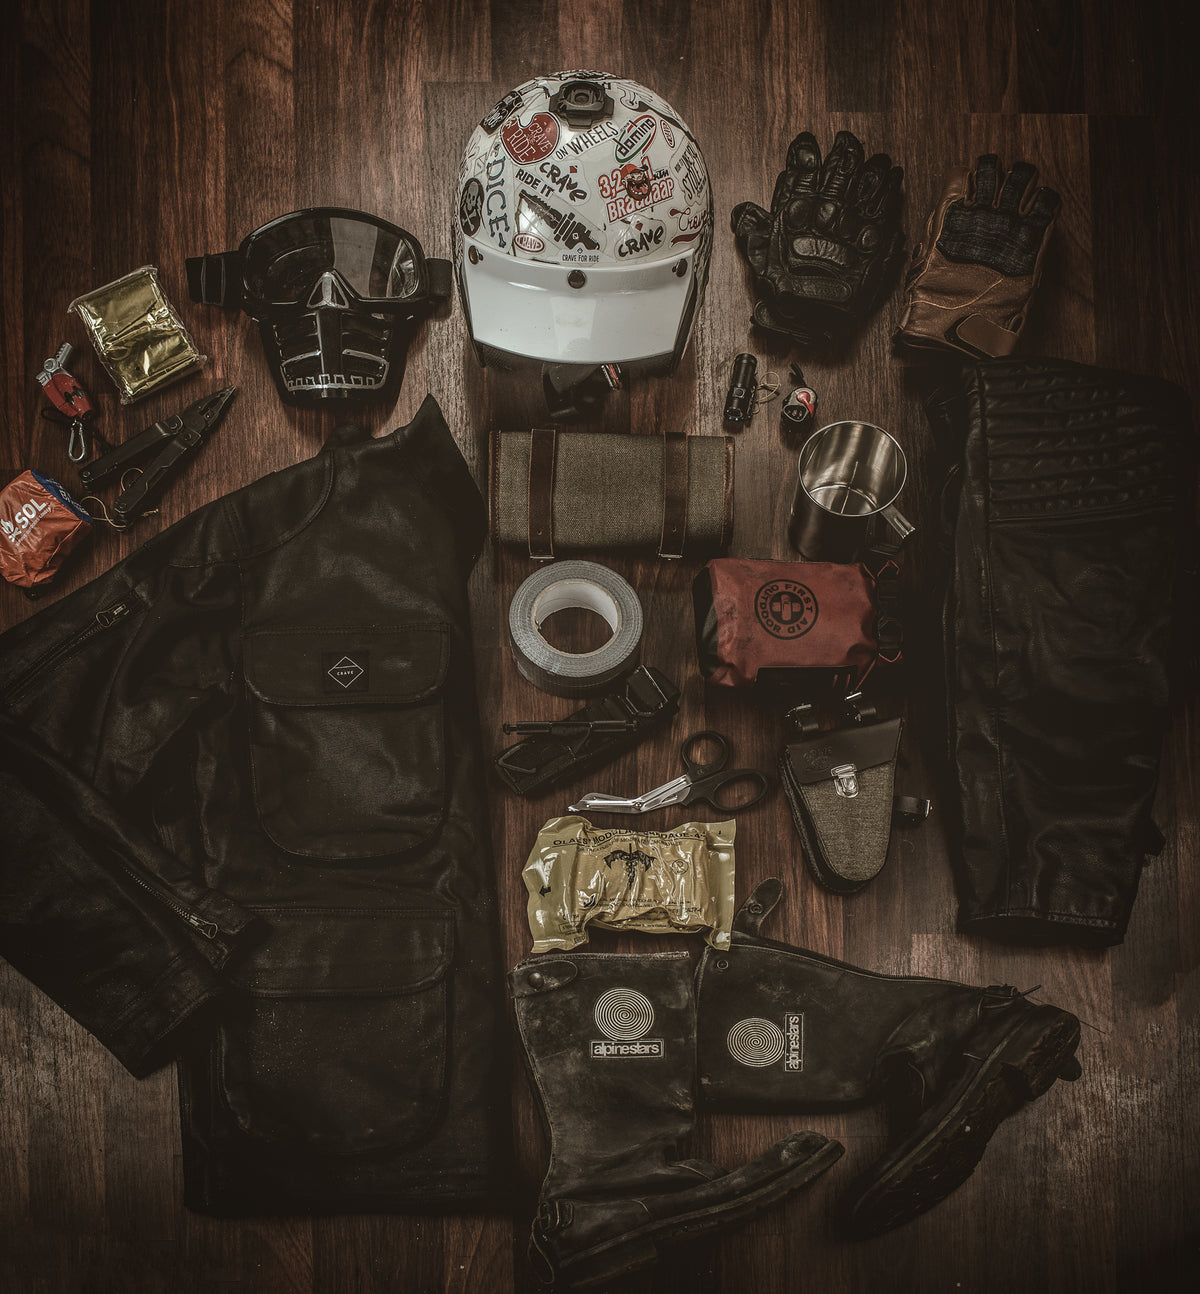 Crave for Ride waxed motorcycle jacket, motorcycle tool roll, frame bag, motorcycle pants and other motorcycle gear